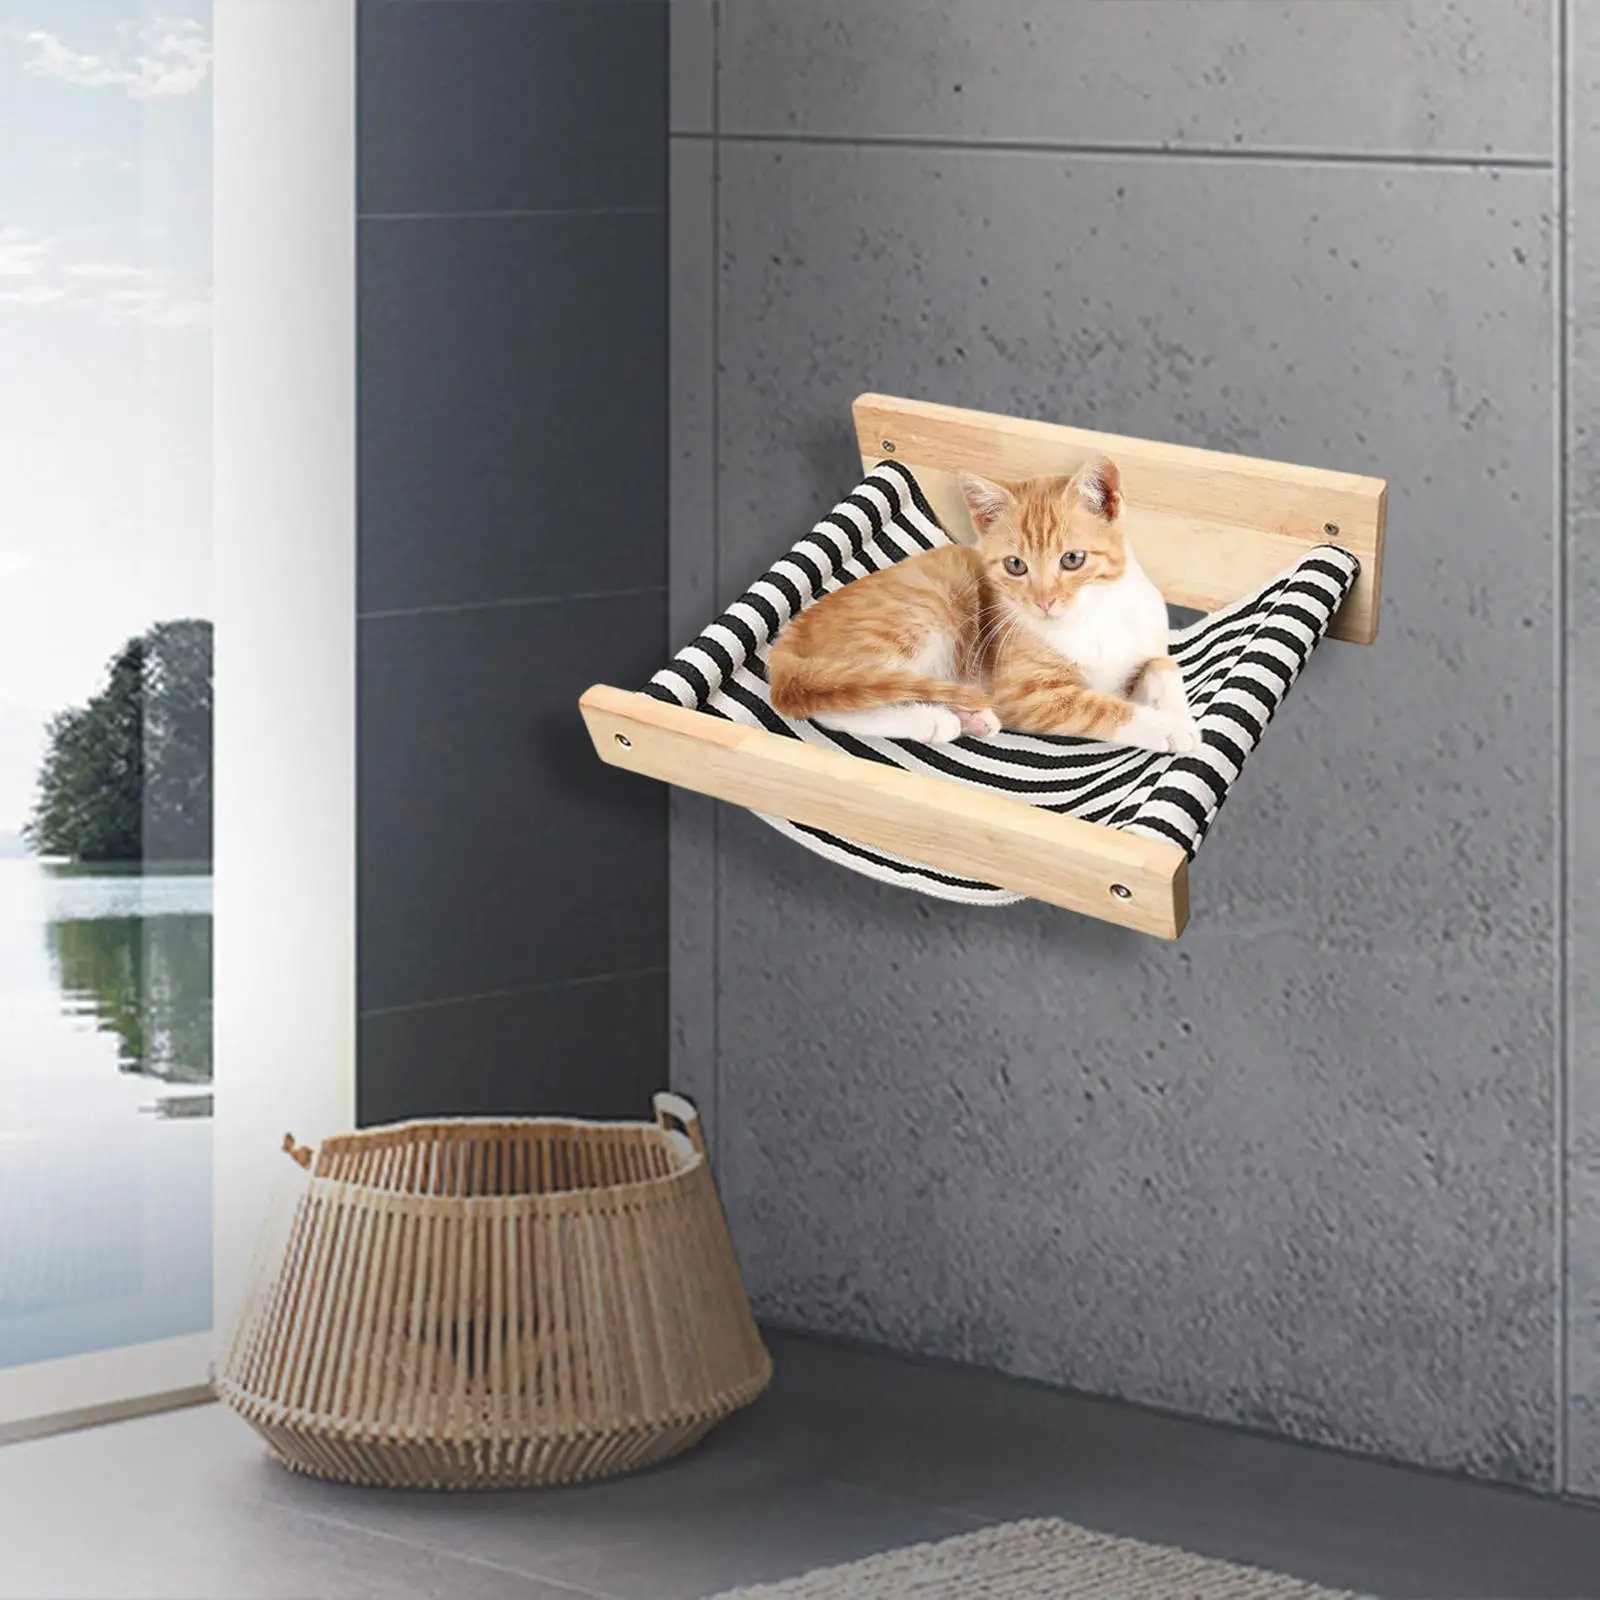 Hanging Cat Hammock Comfortable Resting Seat Space Saving Modern Playing Cats Wall Bed Furniture Cats Wall Shelves Pet Cat Bed